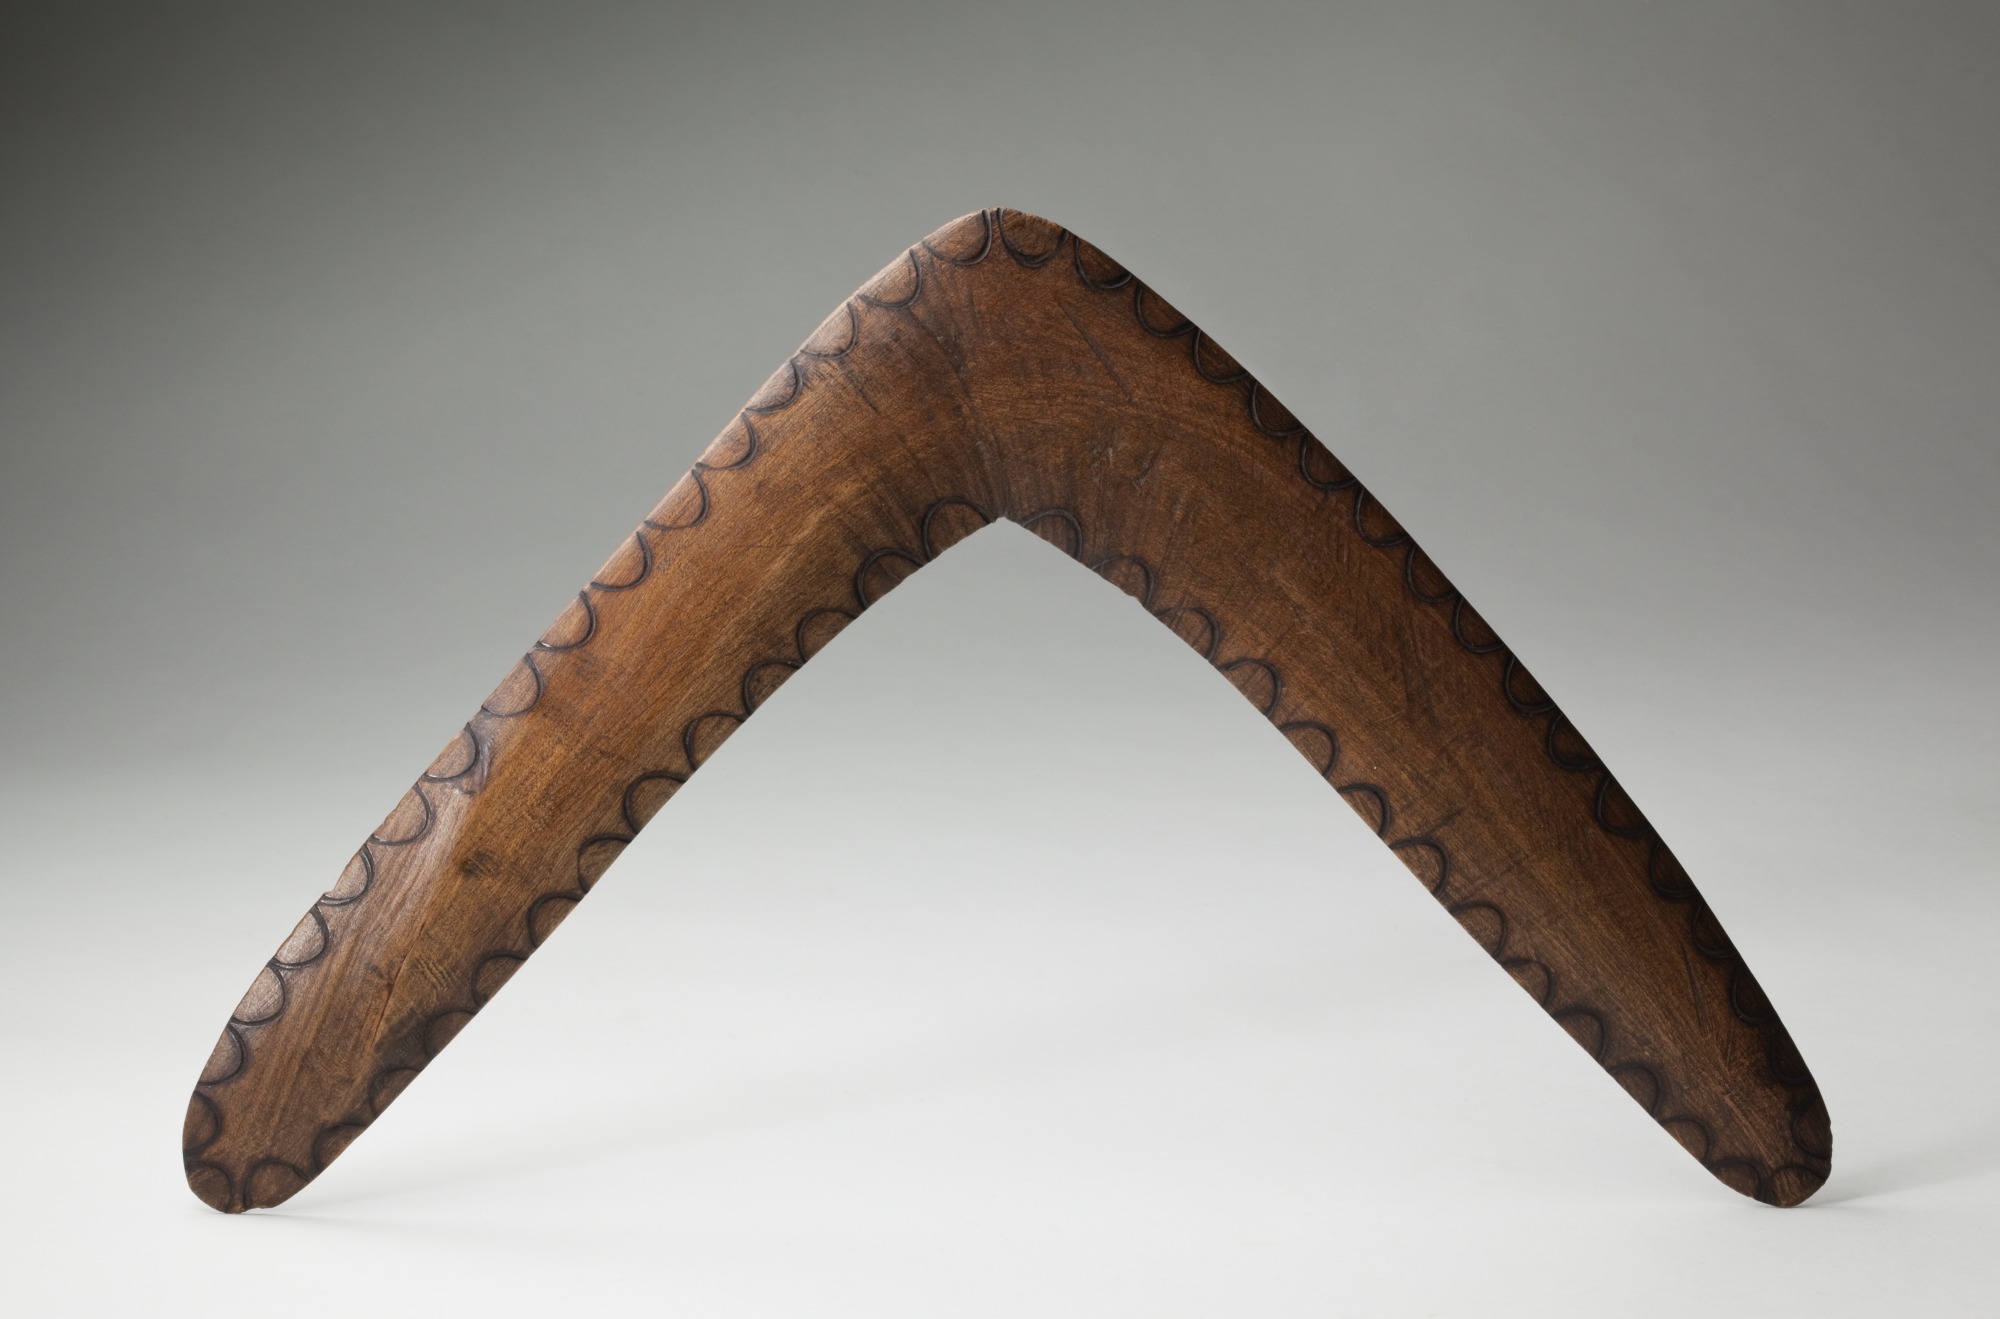  Boomerang with carved decorations, attributed to Robert Wandin, Coranderrk, 1890s.